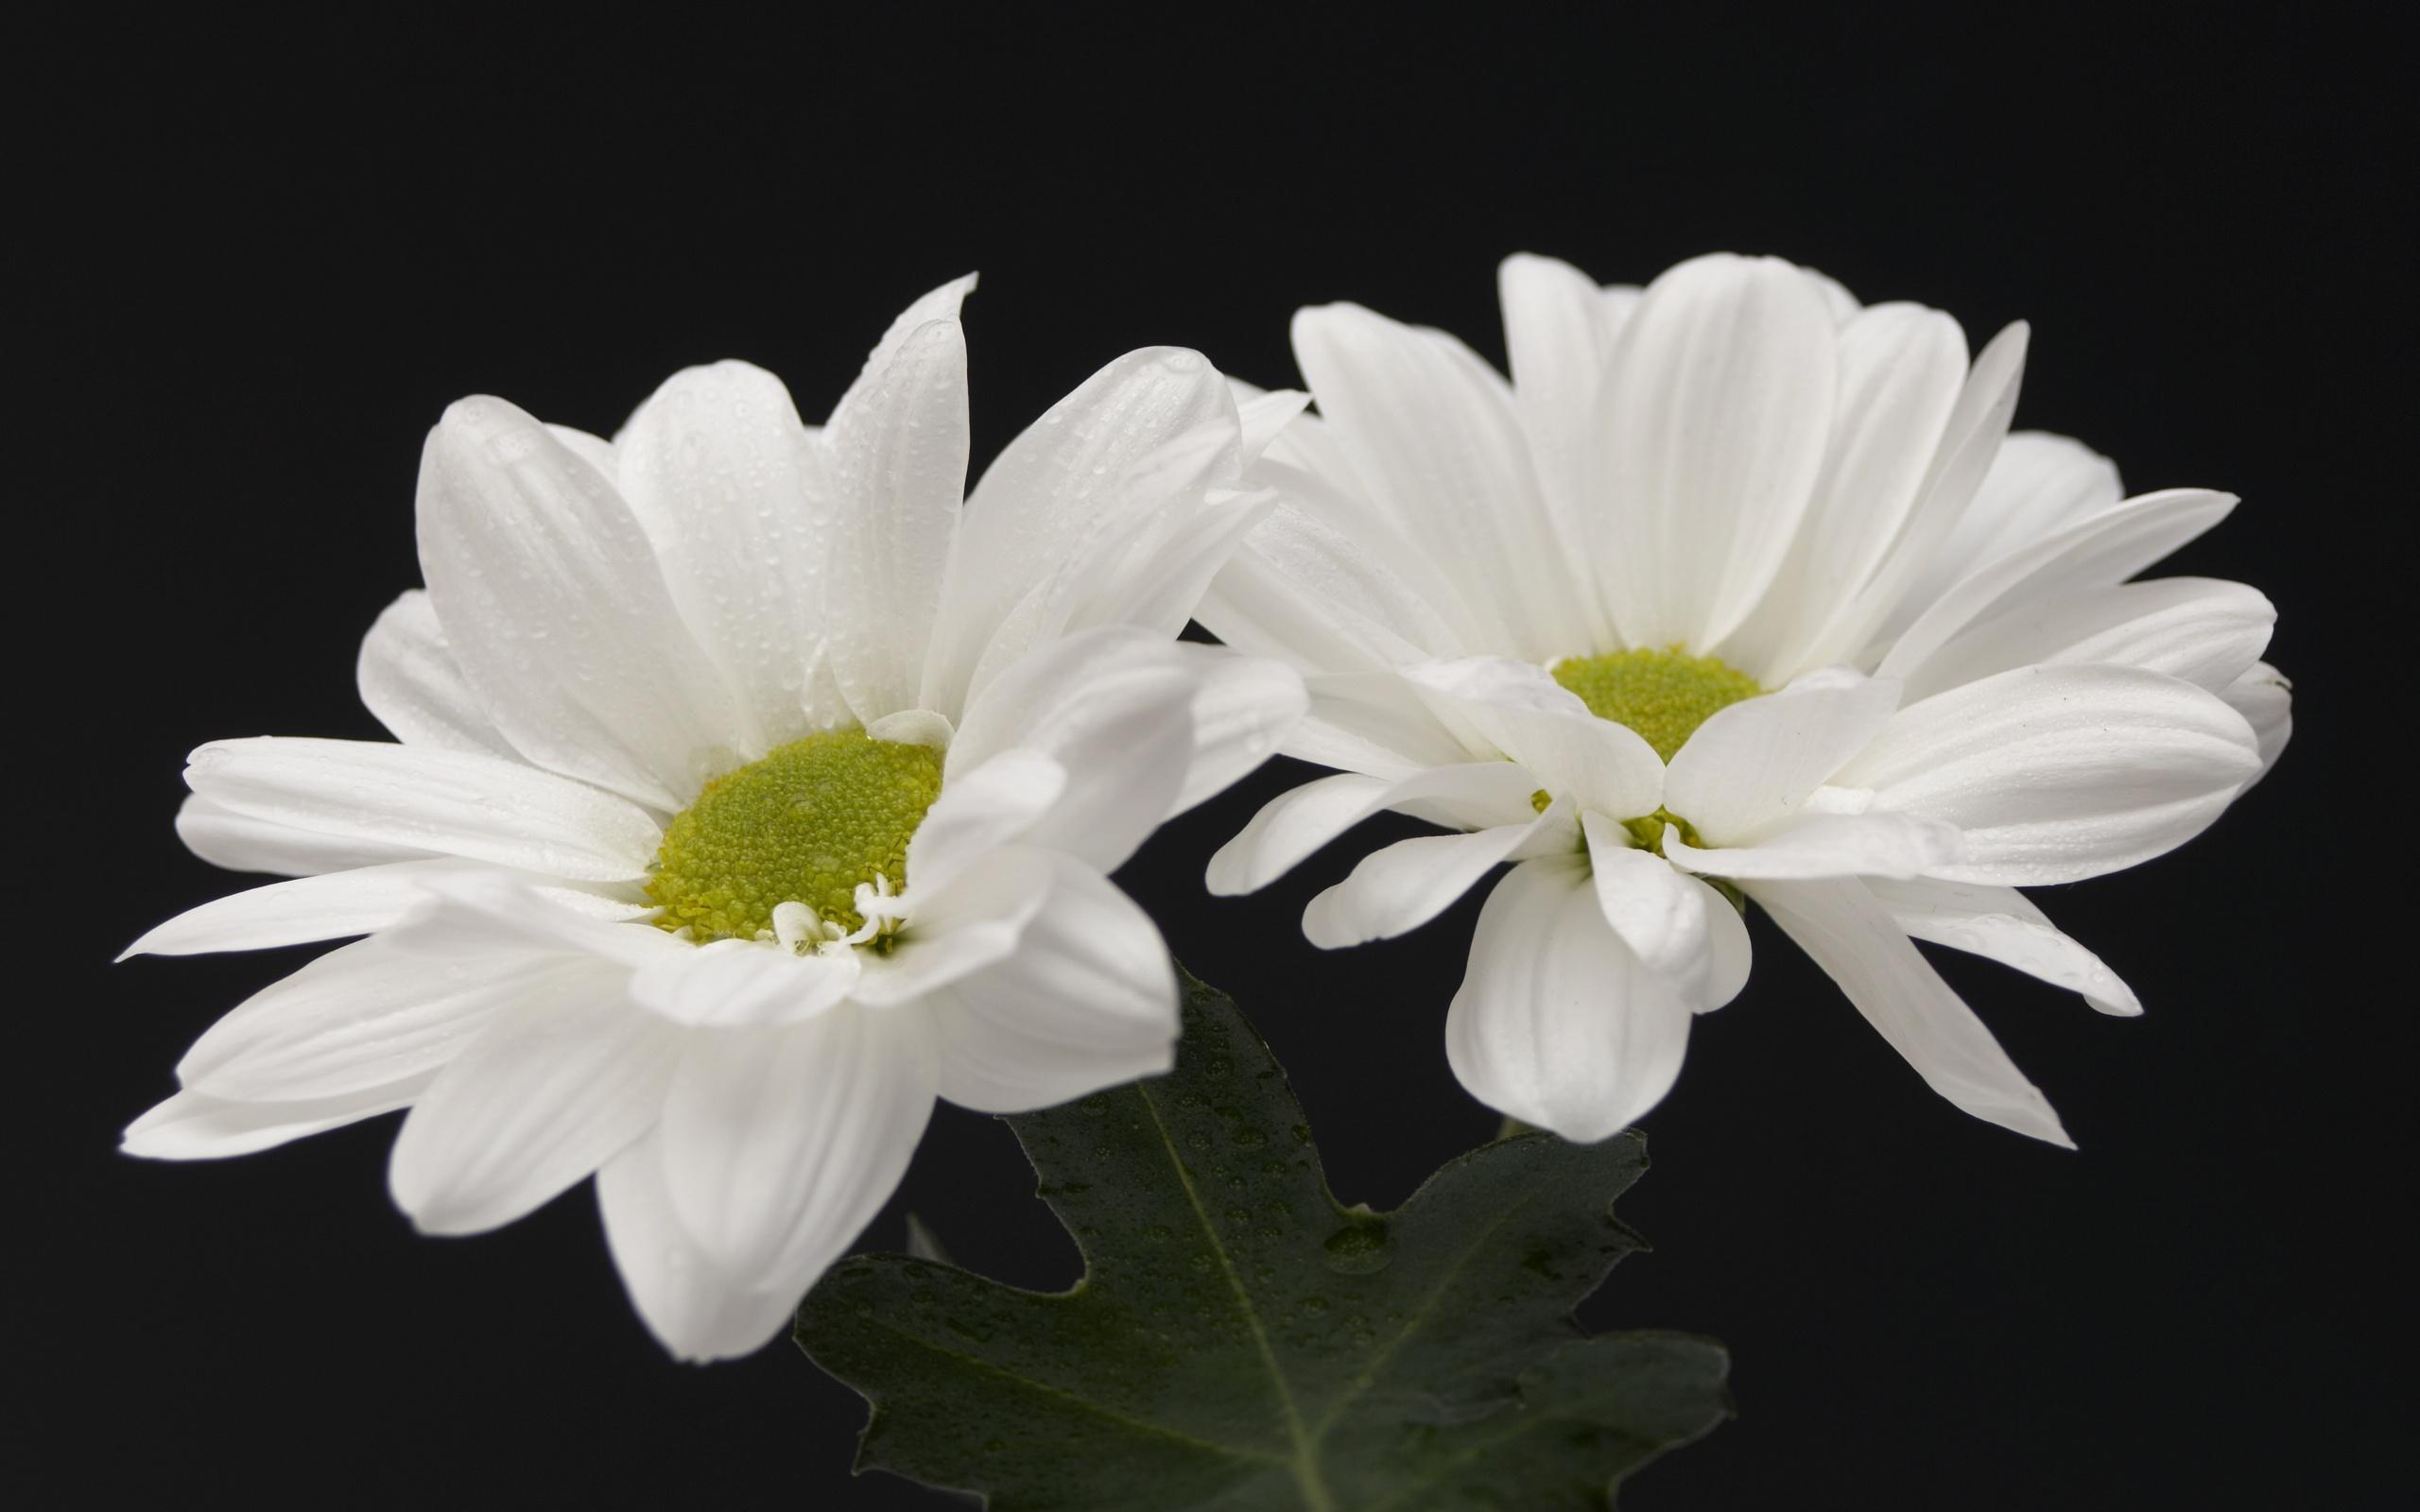 Two white flowers wallpaper. Two white flowers